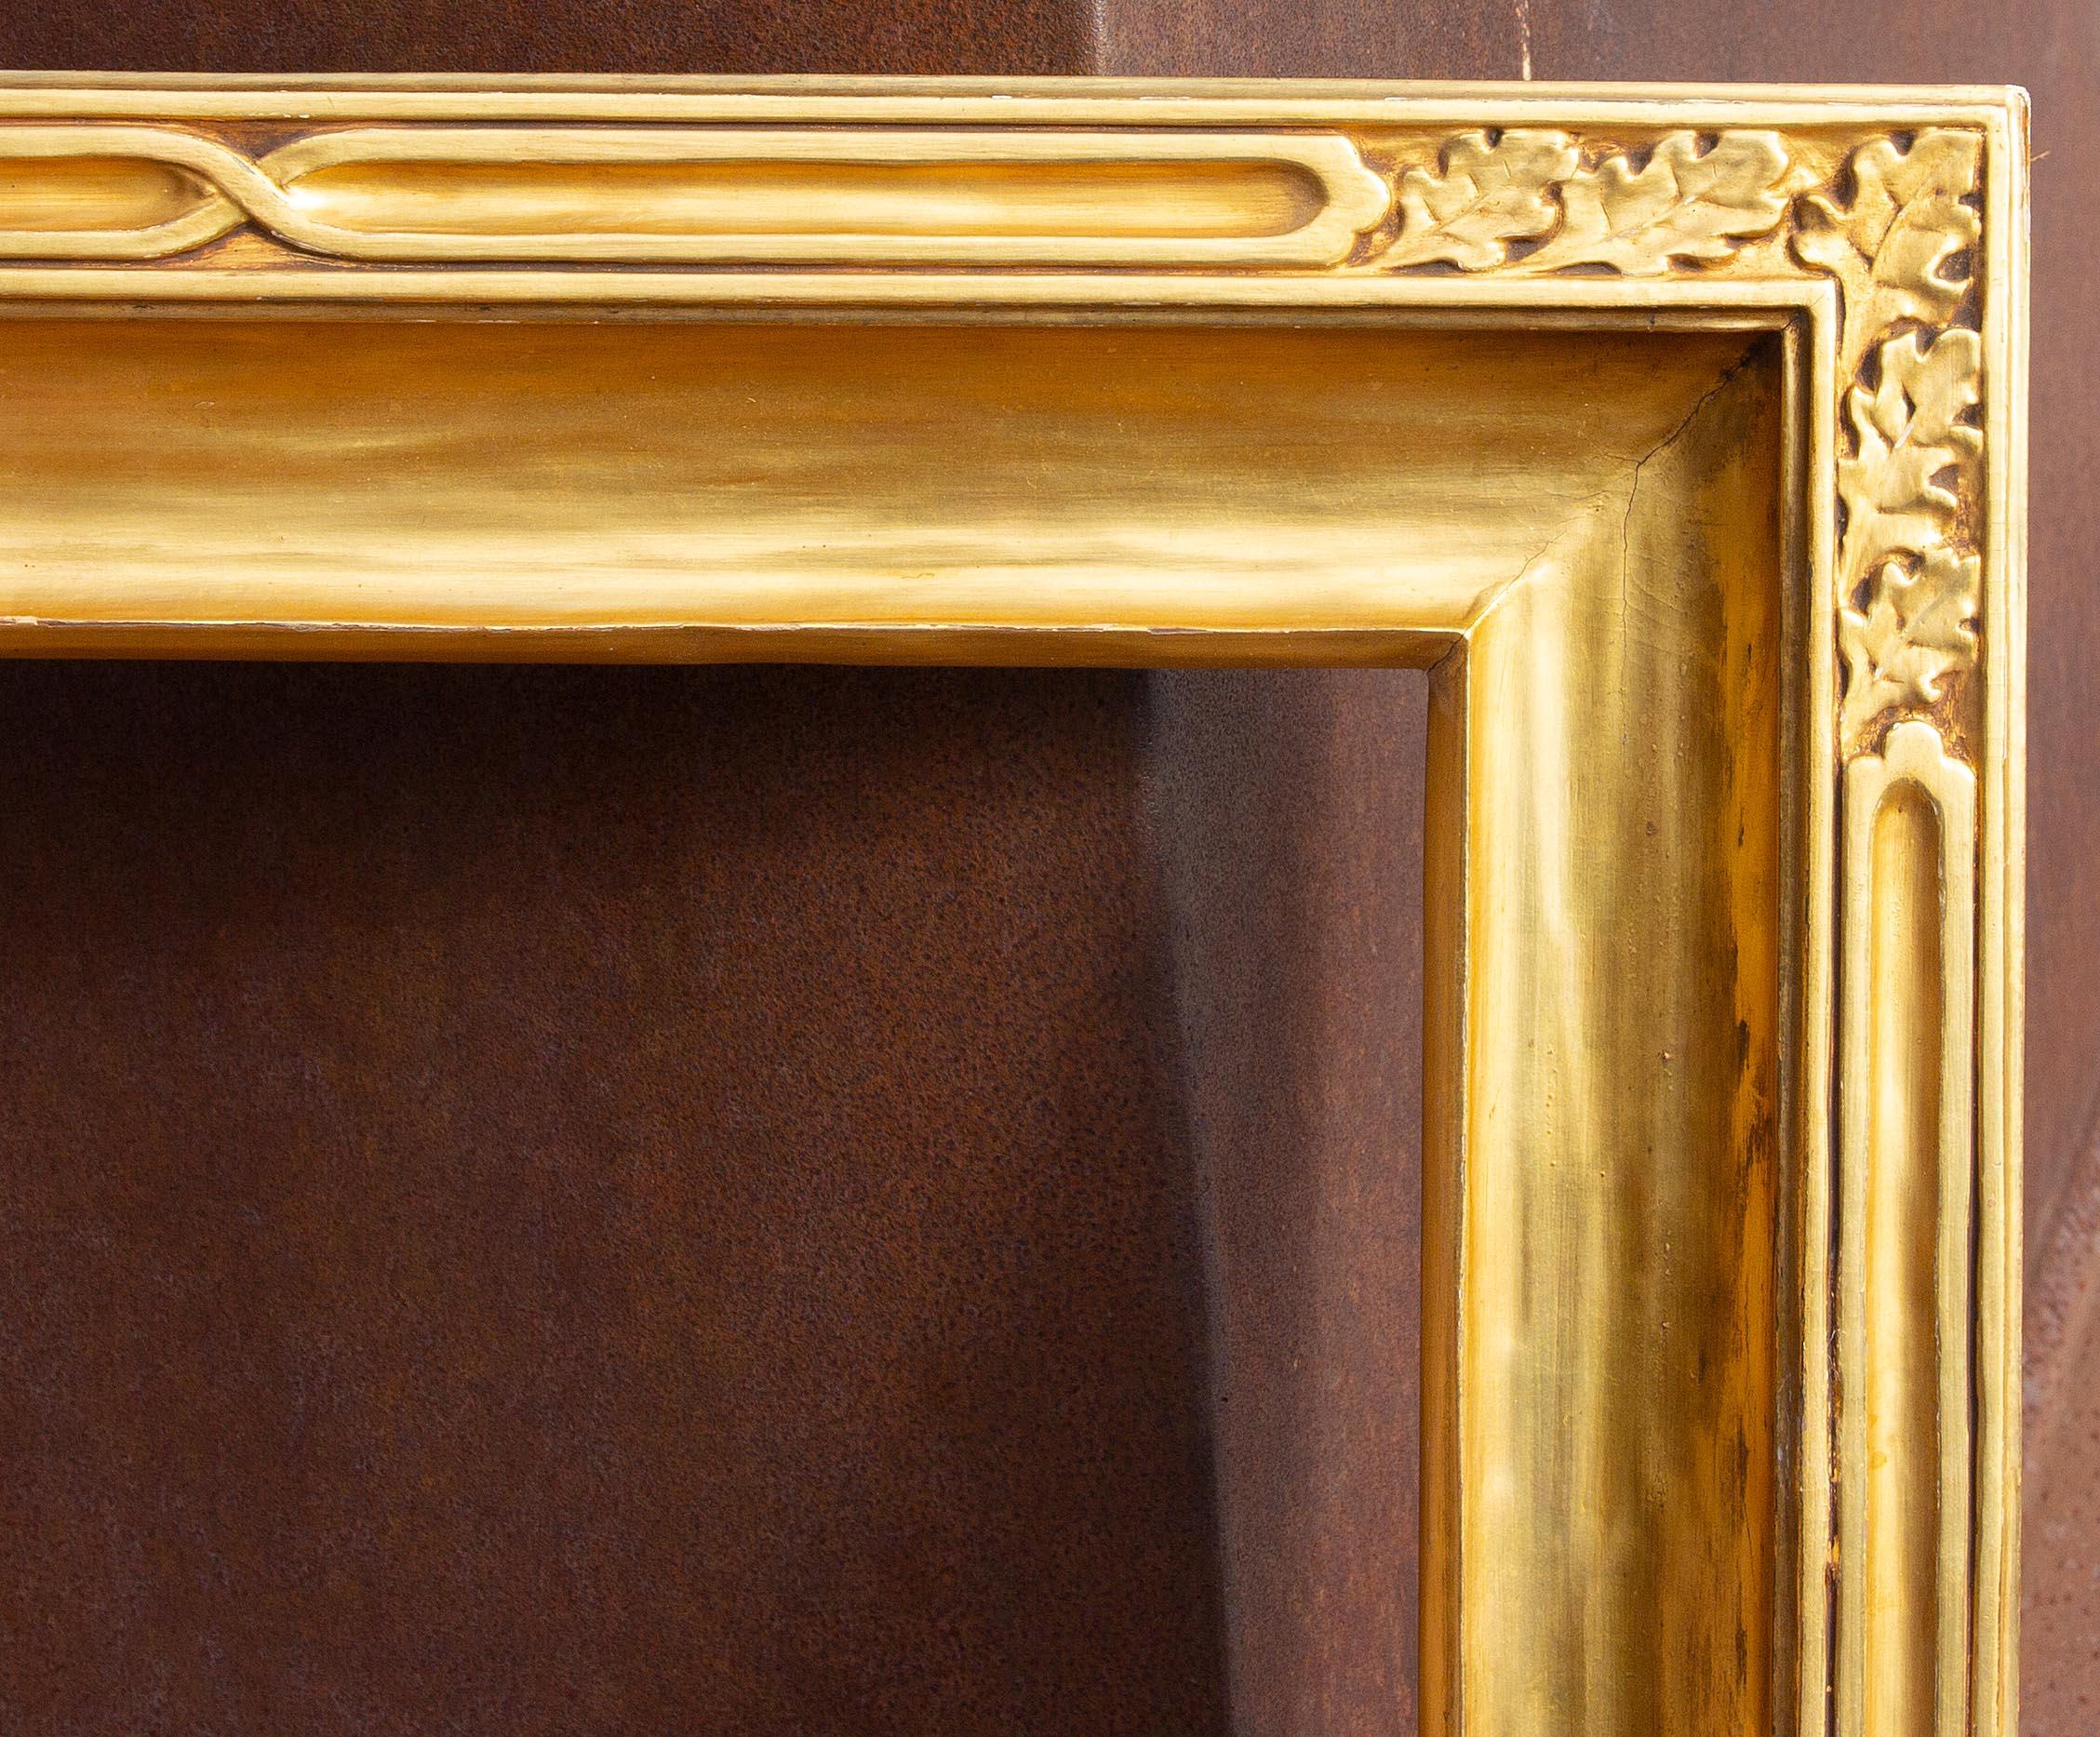 Antique carved and gilded arts and crafts frame. Gold leaf. Attributed to Newcomb Macklin. Circa 1920's. Will fit 16